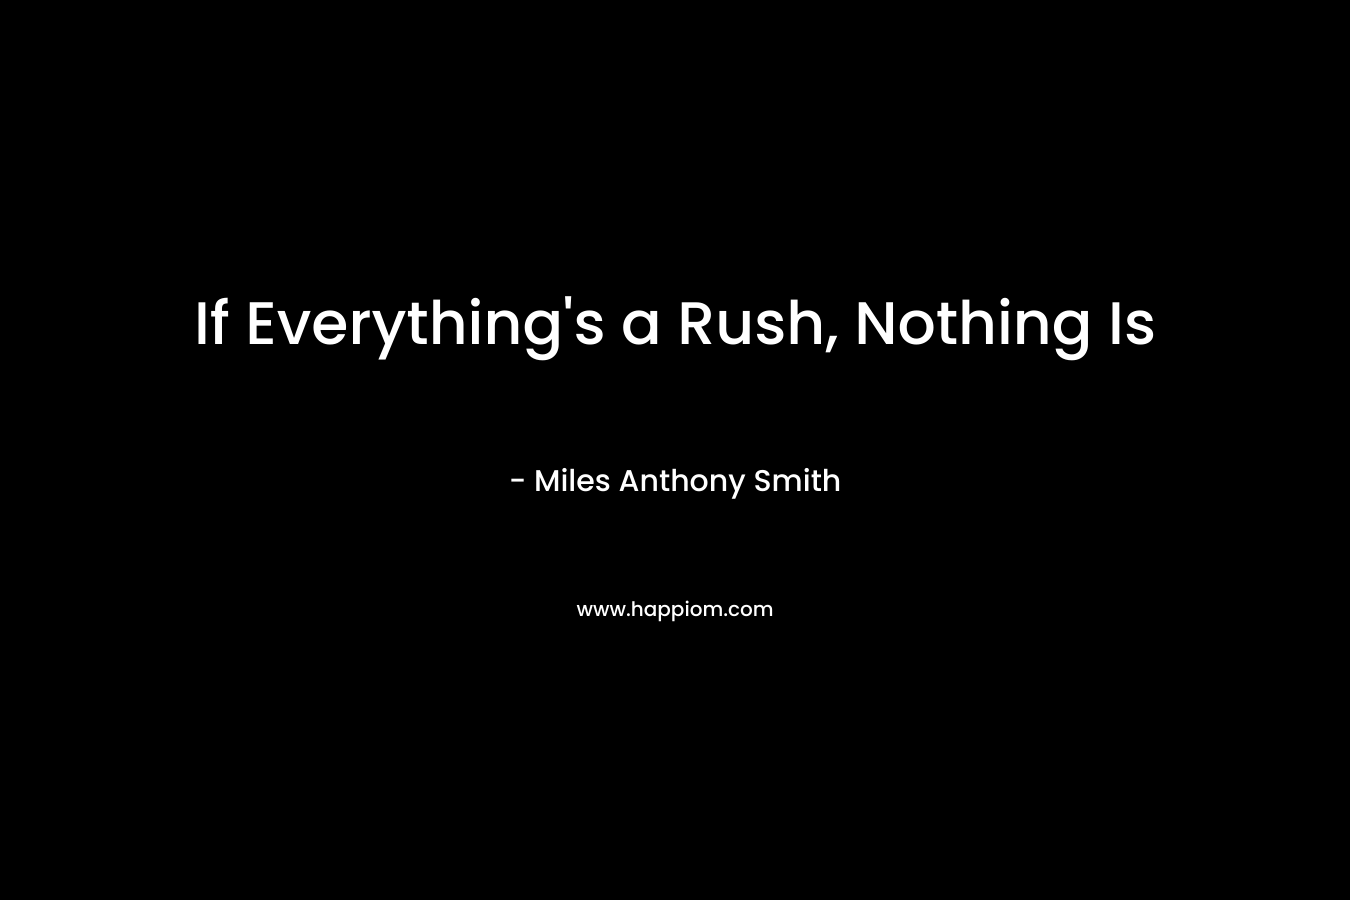 If Everything's a Rush, Nothing Is